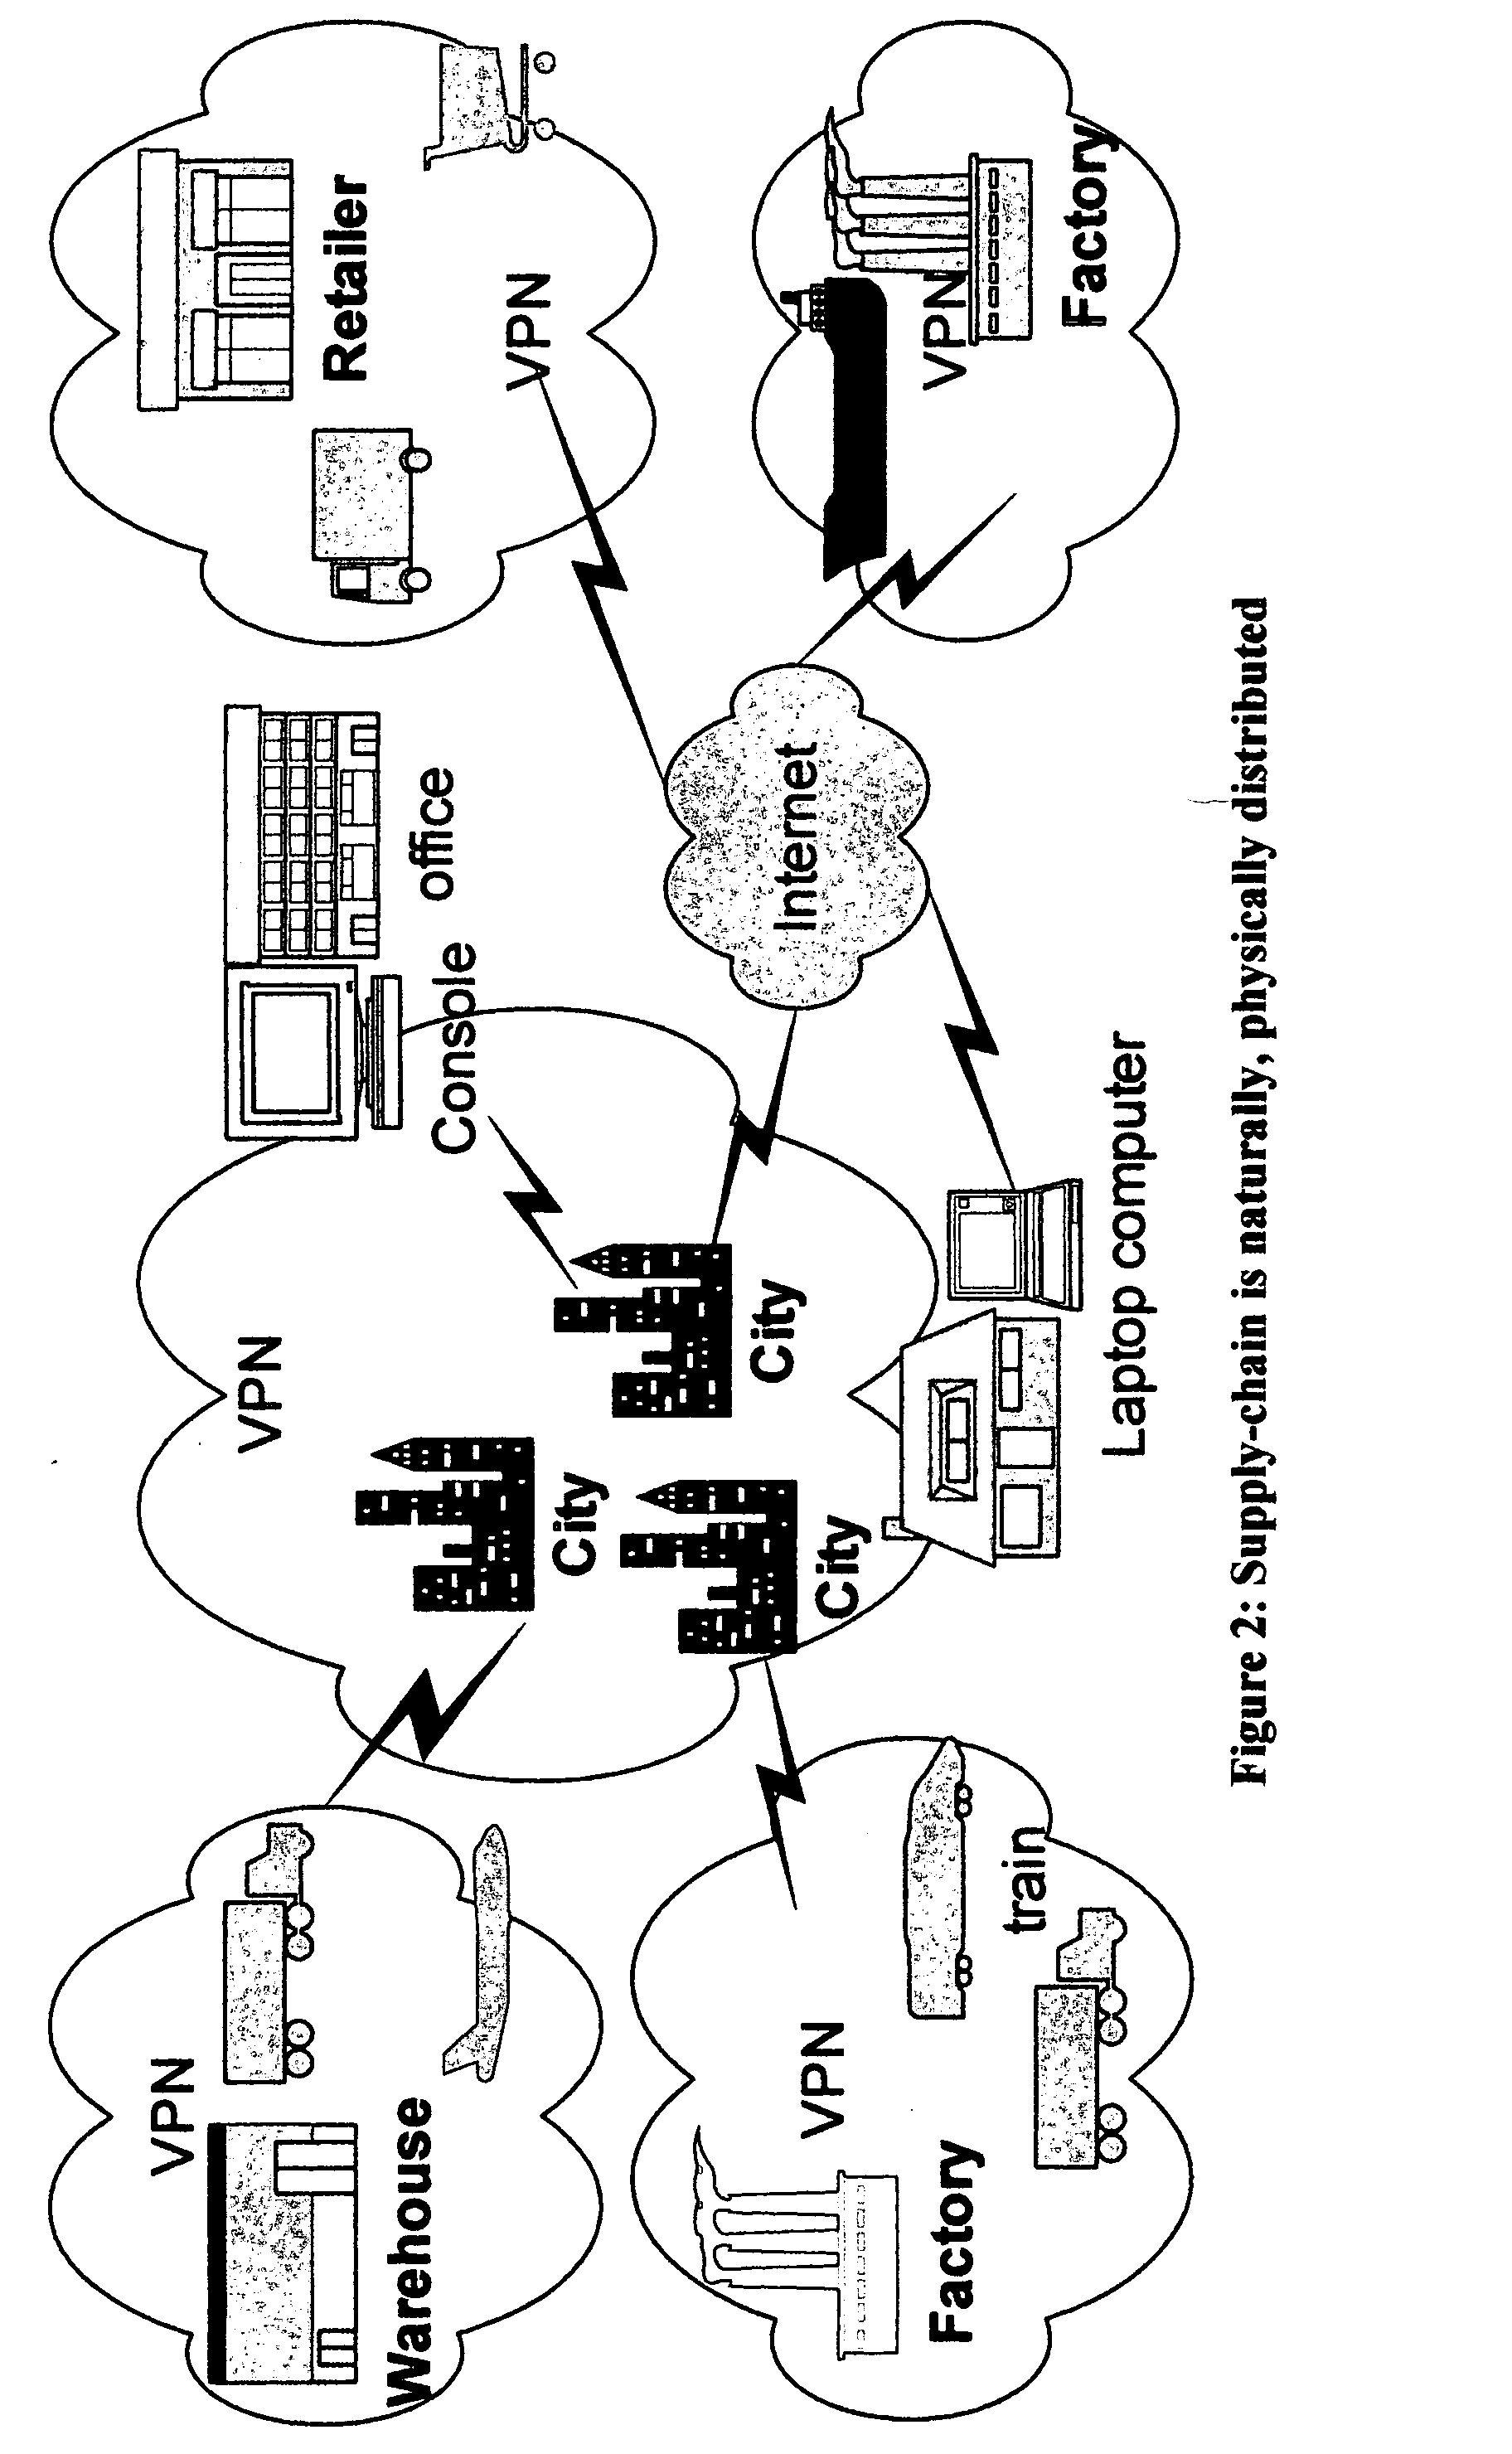 System and method for use of mobile policy agents and local services, within a geographically distributed service grid, to provide greater security via local intelligence and life-cycle management for RFlD tagged items